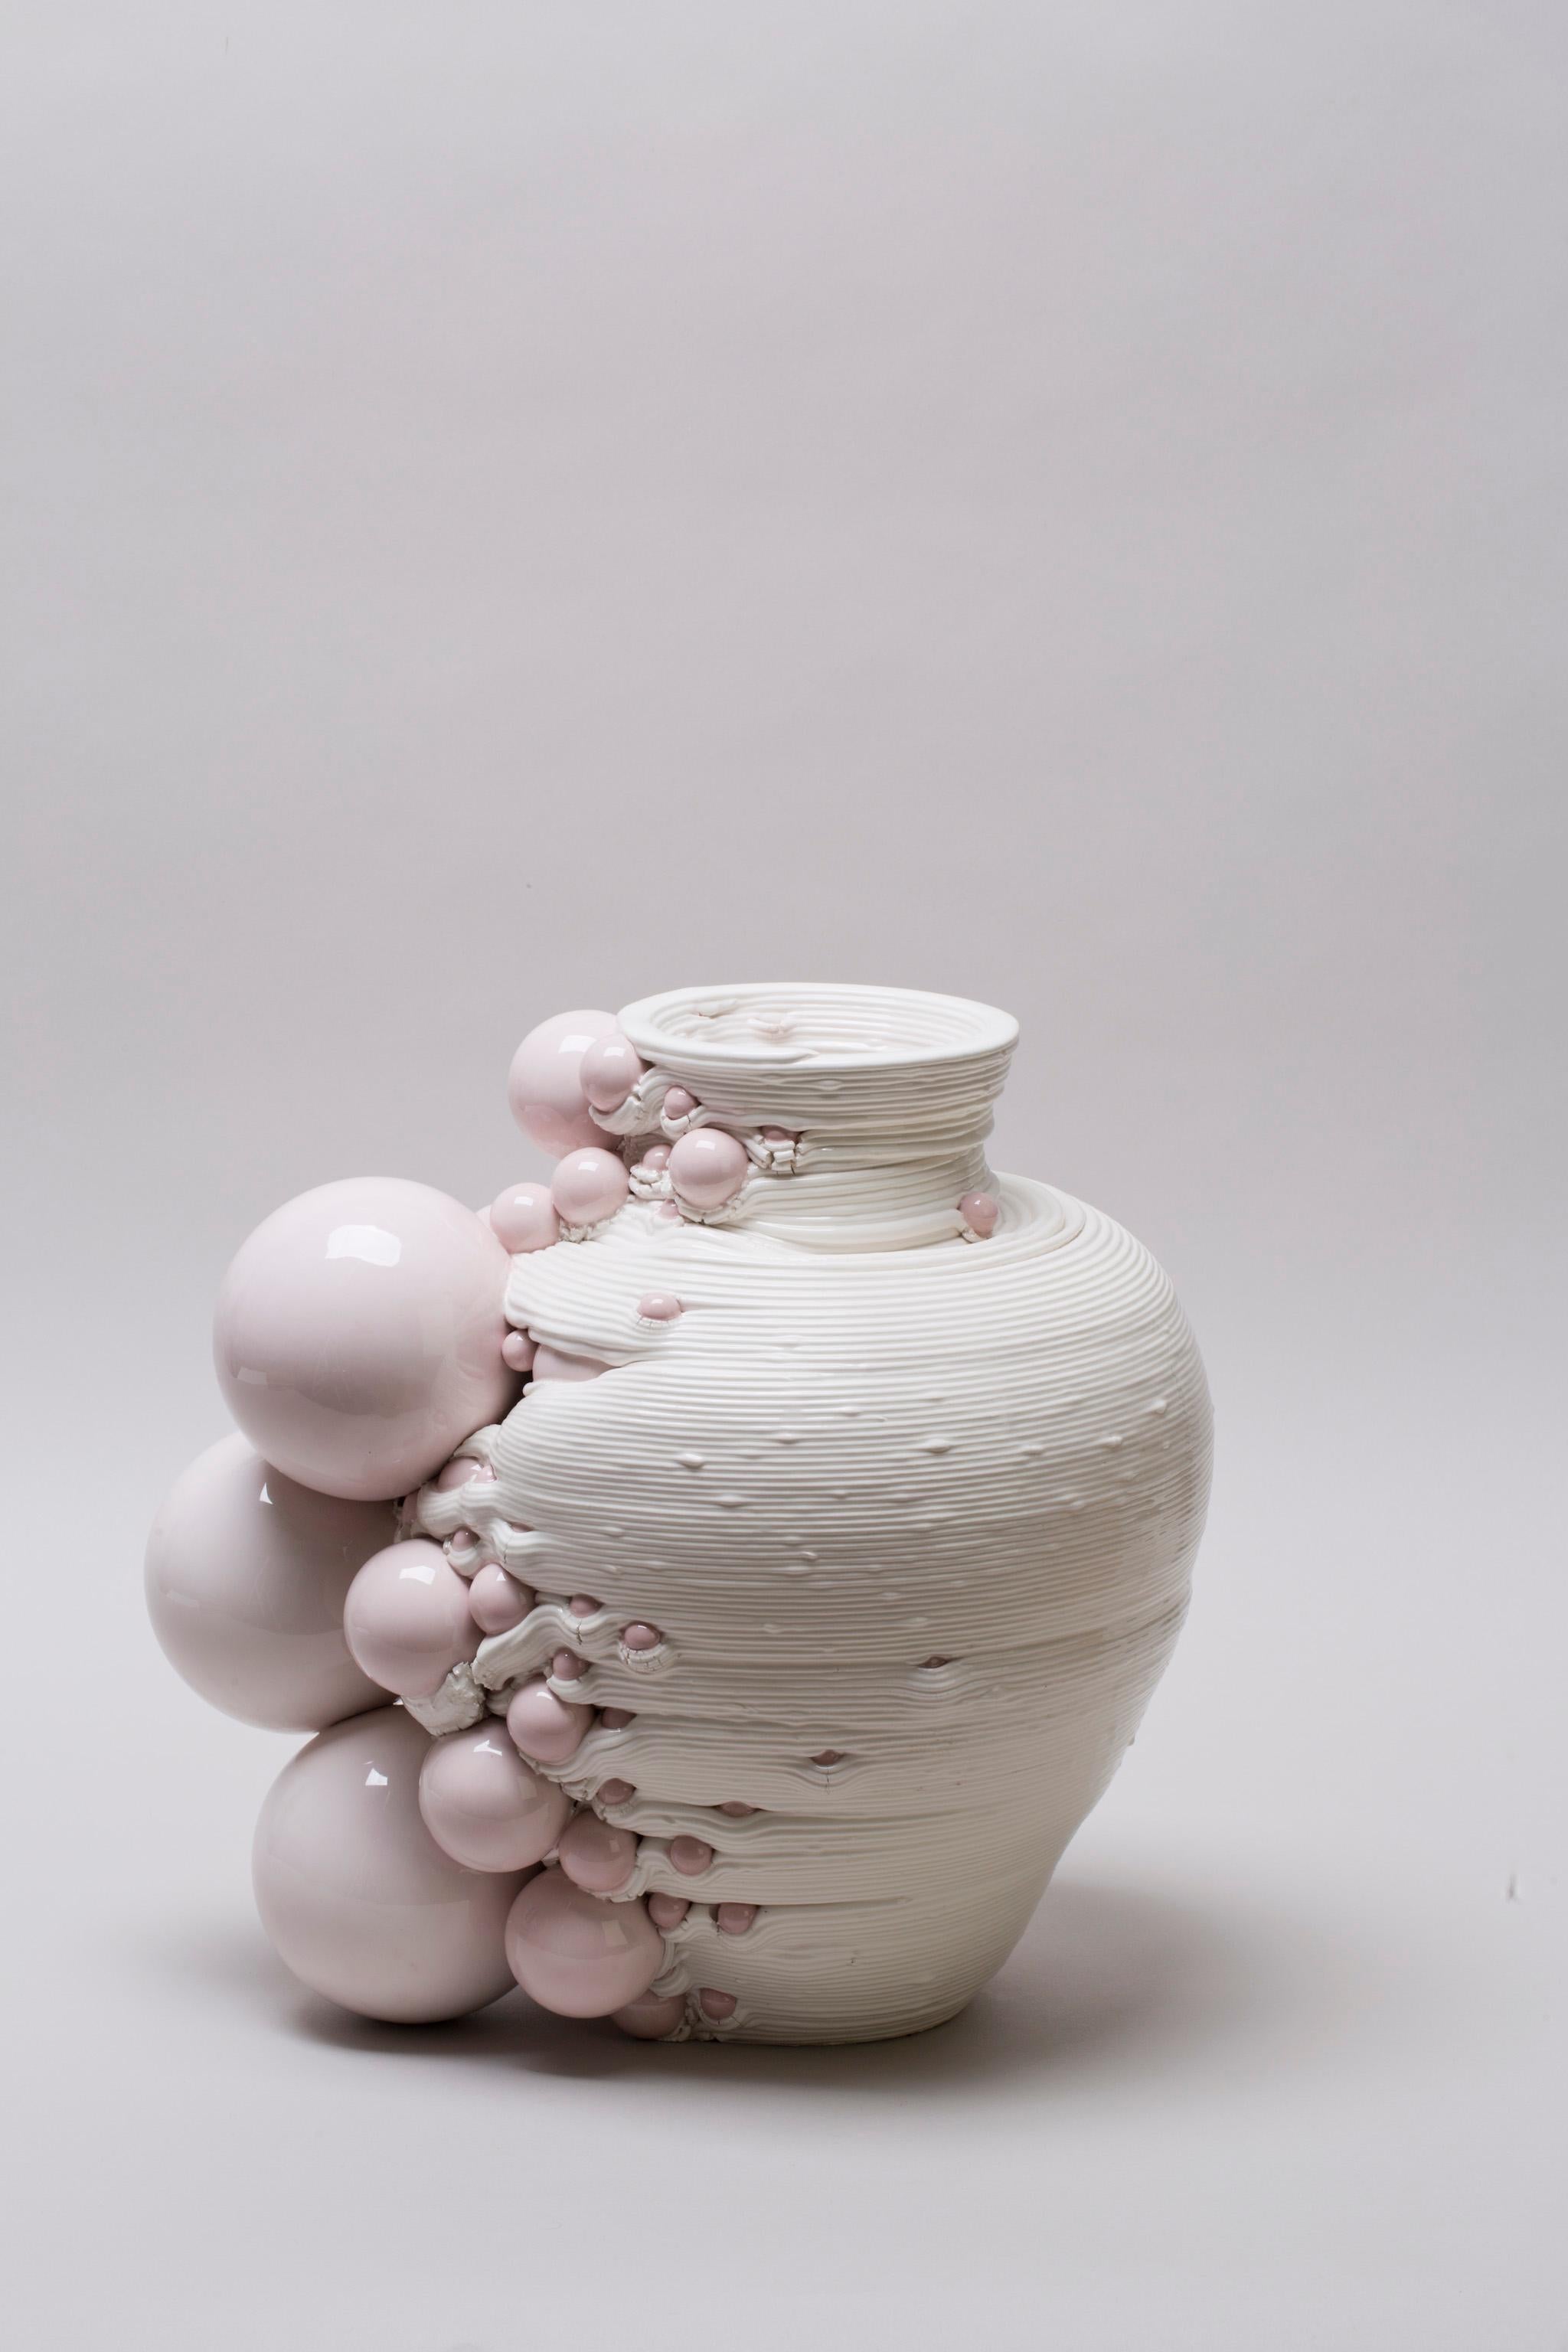 White 3D Printed Ceramic Sculptural Vase Italy Contemporary, 21st Century For Sale 4